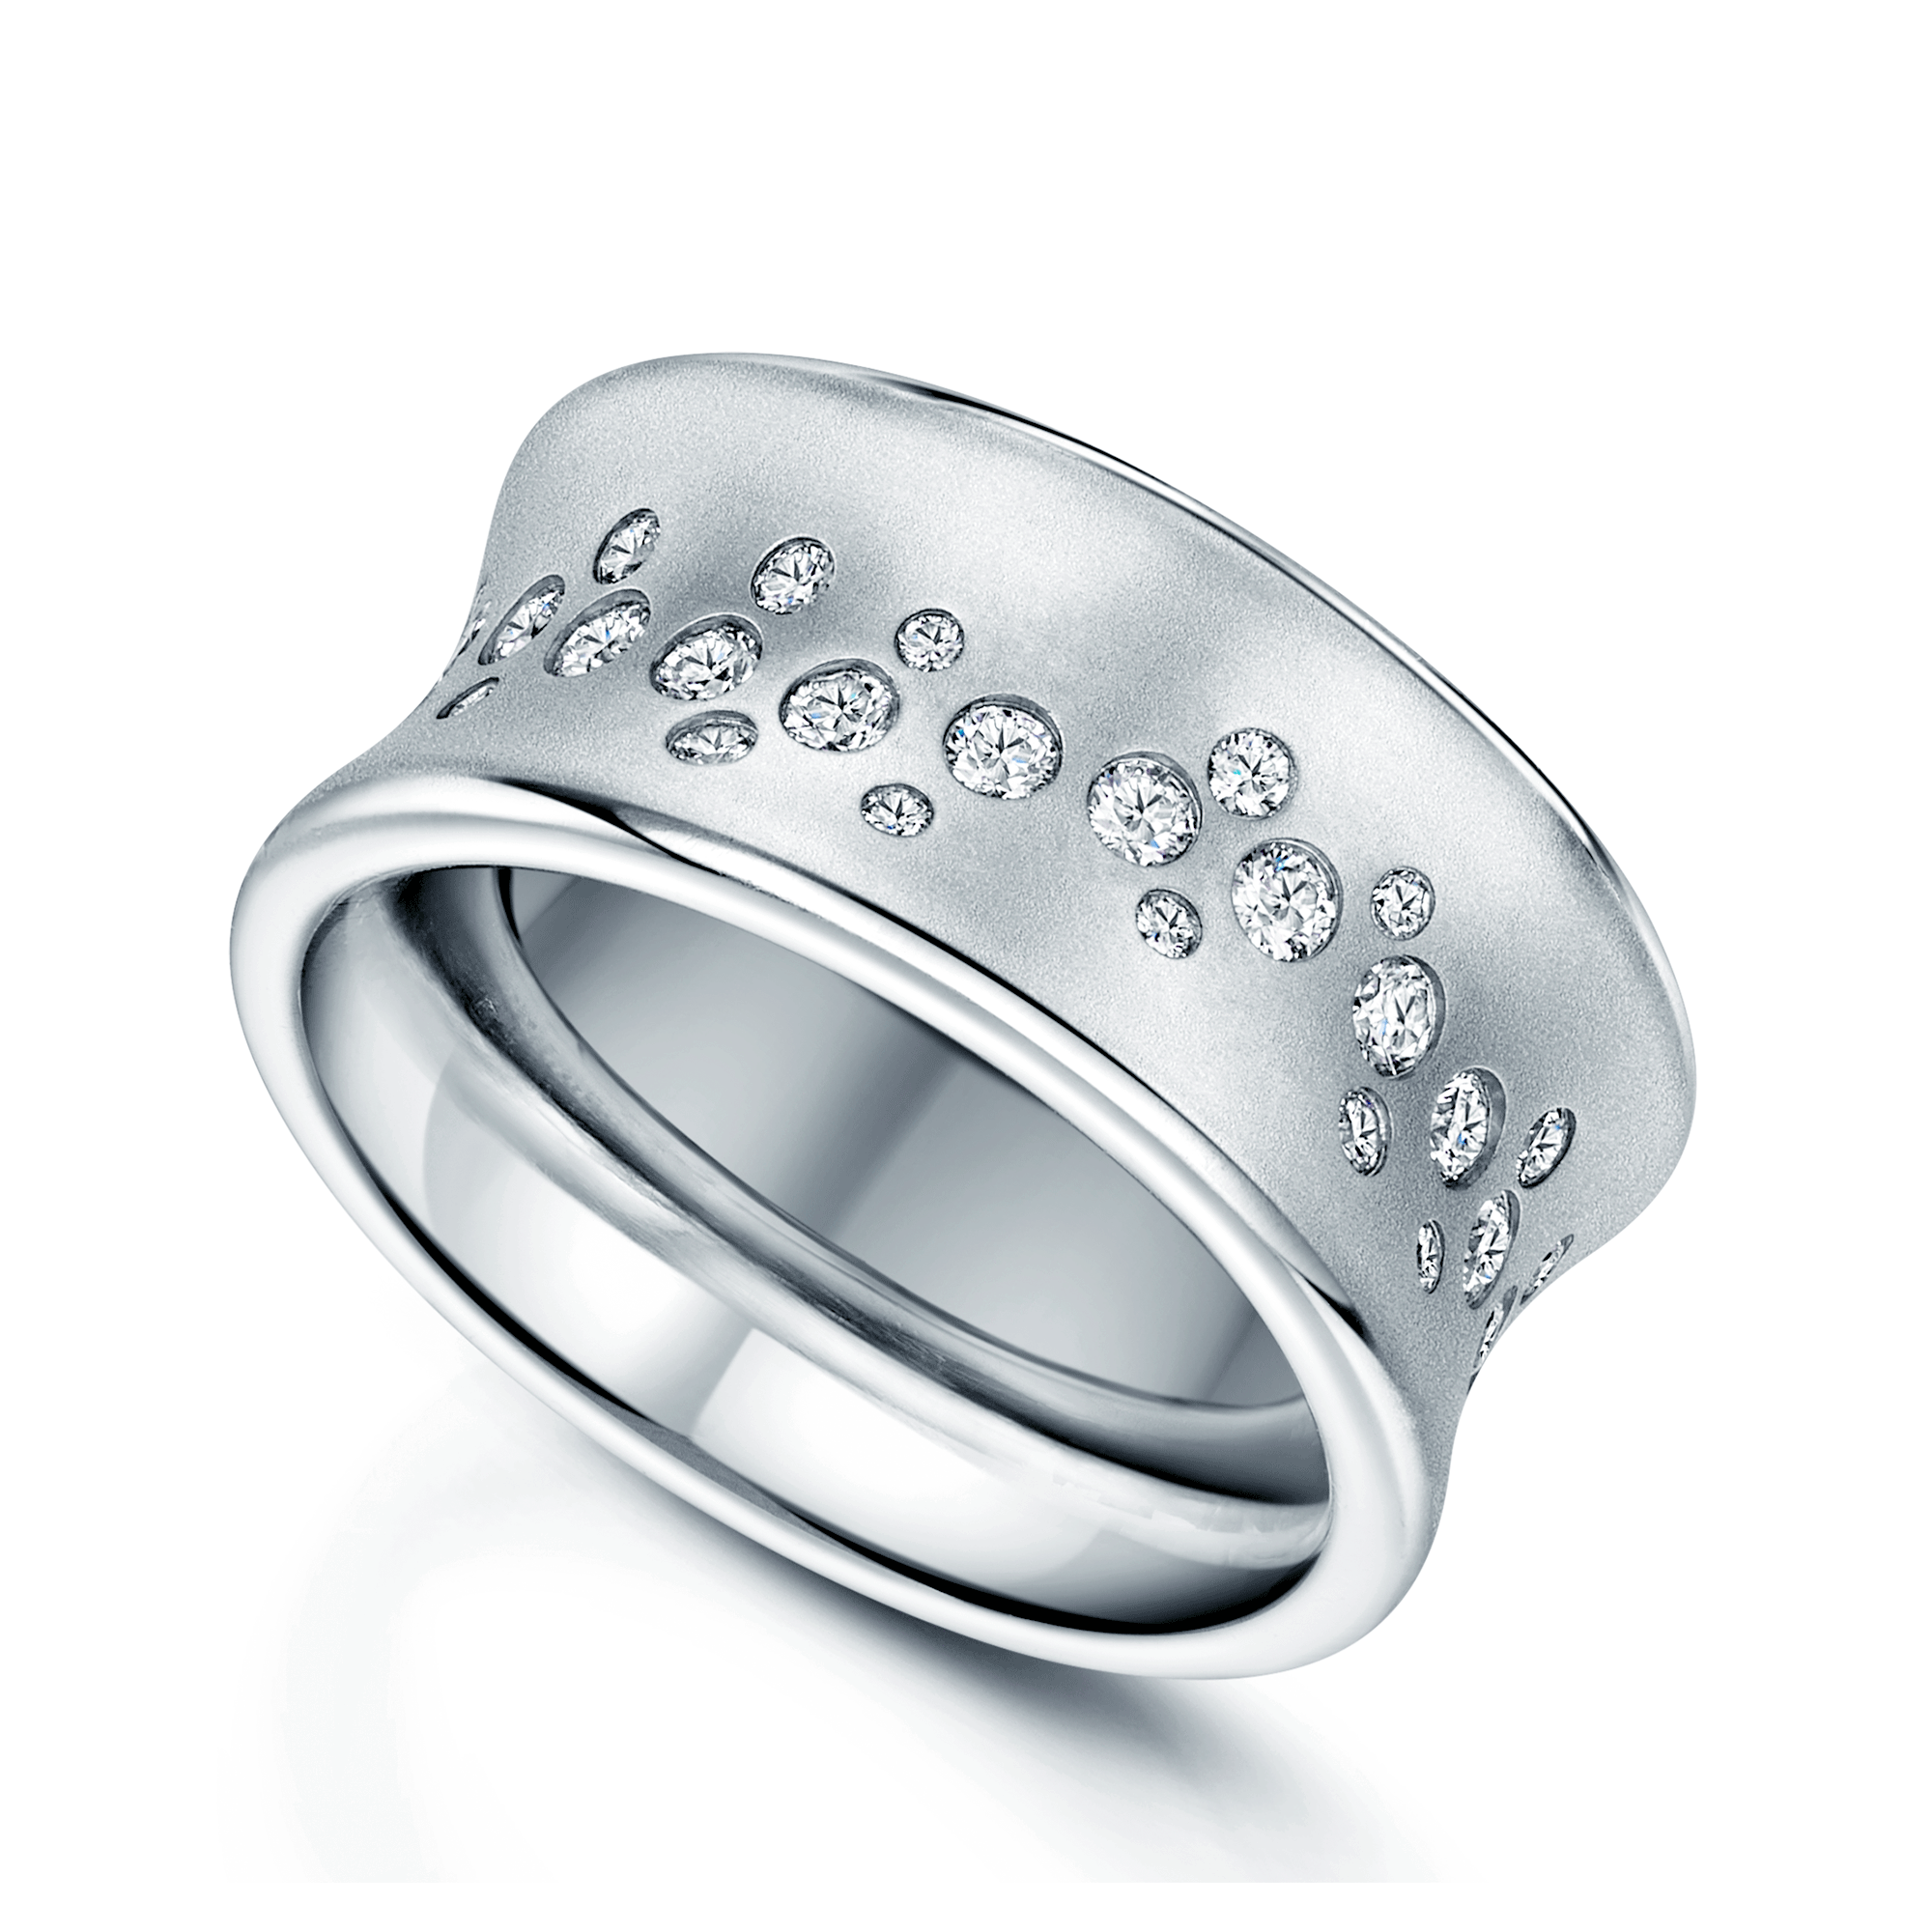 18ct White Gold Round Brilliant Cut Diamond Full Scattered Dress Ring With A Satin Finish